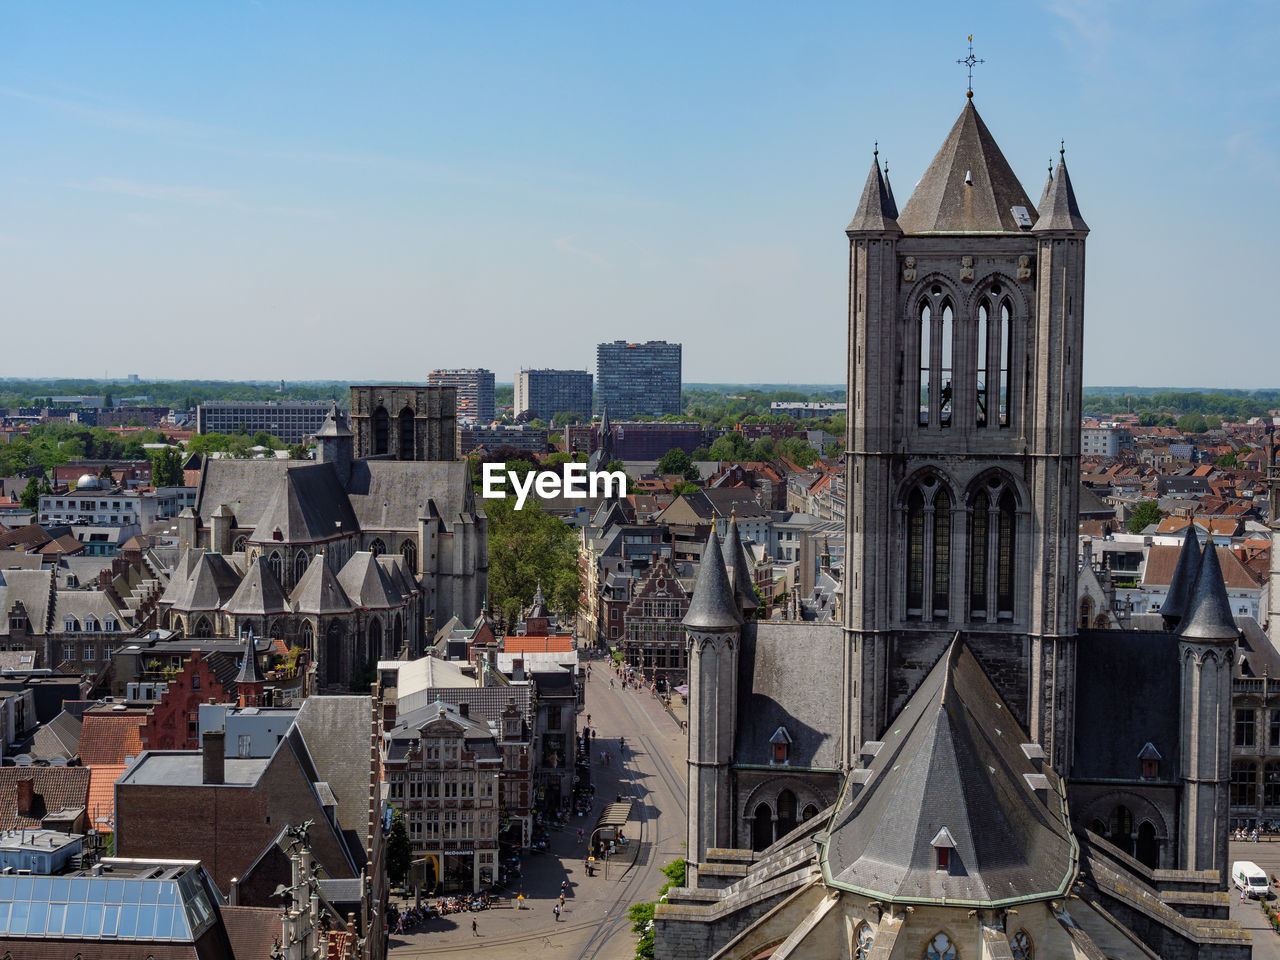 Gent from above